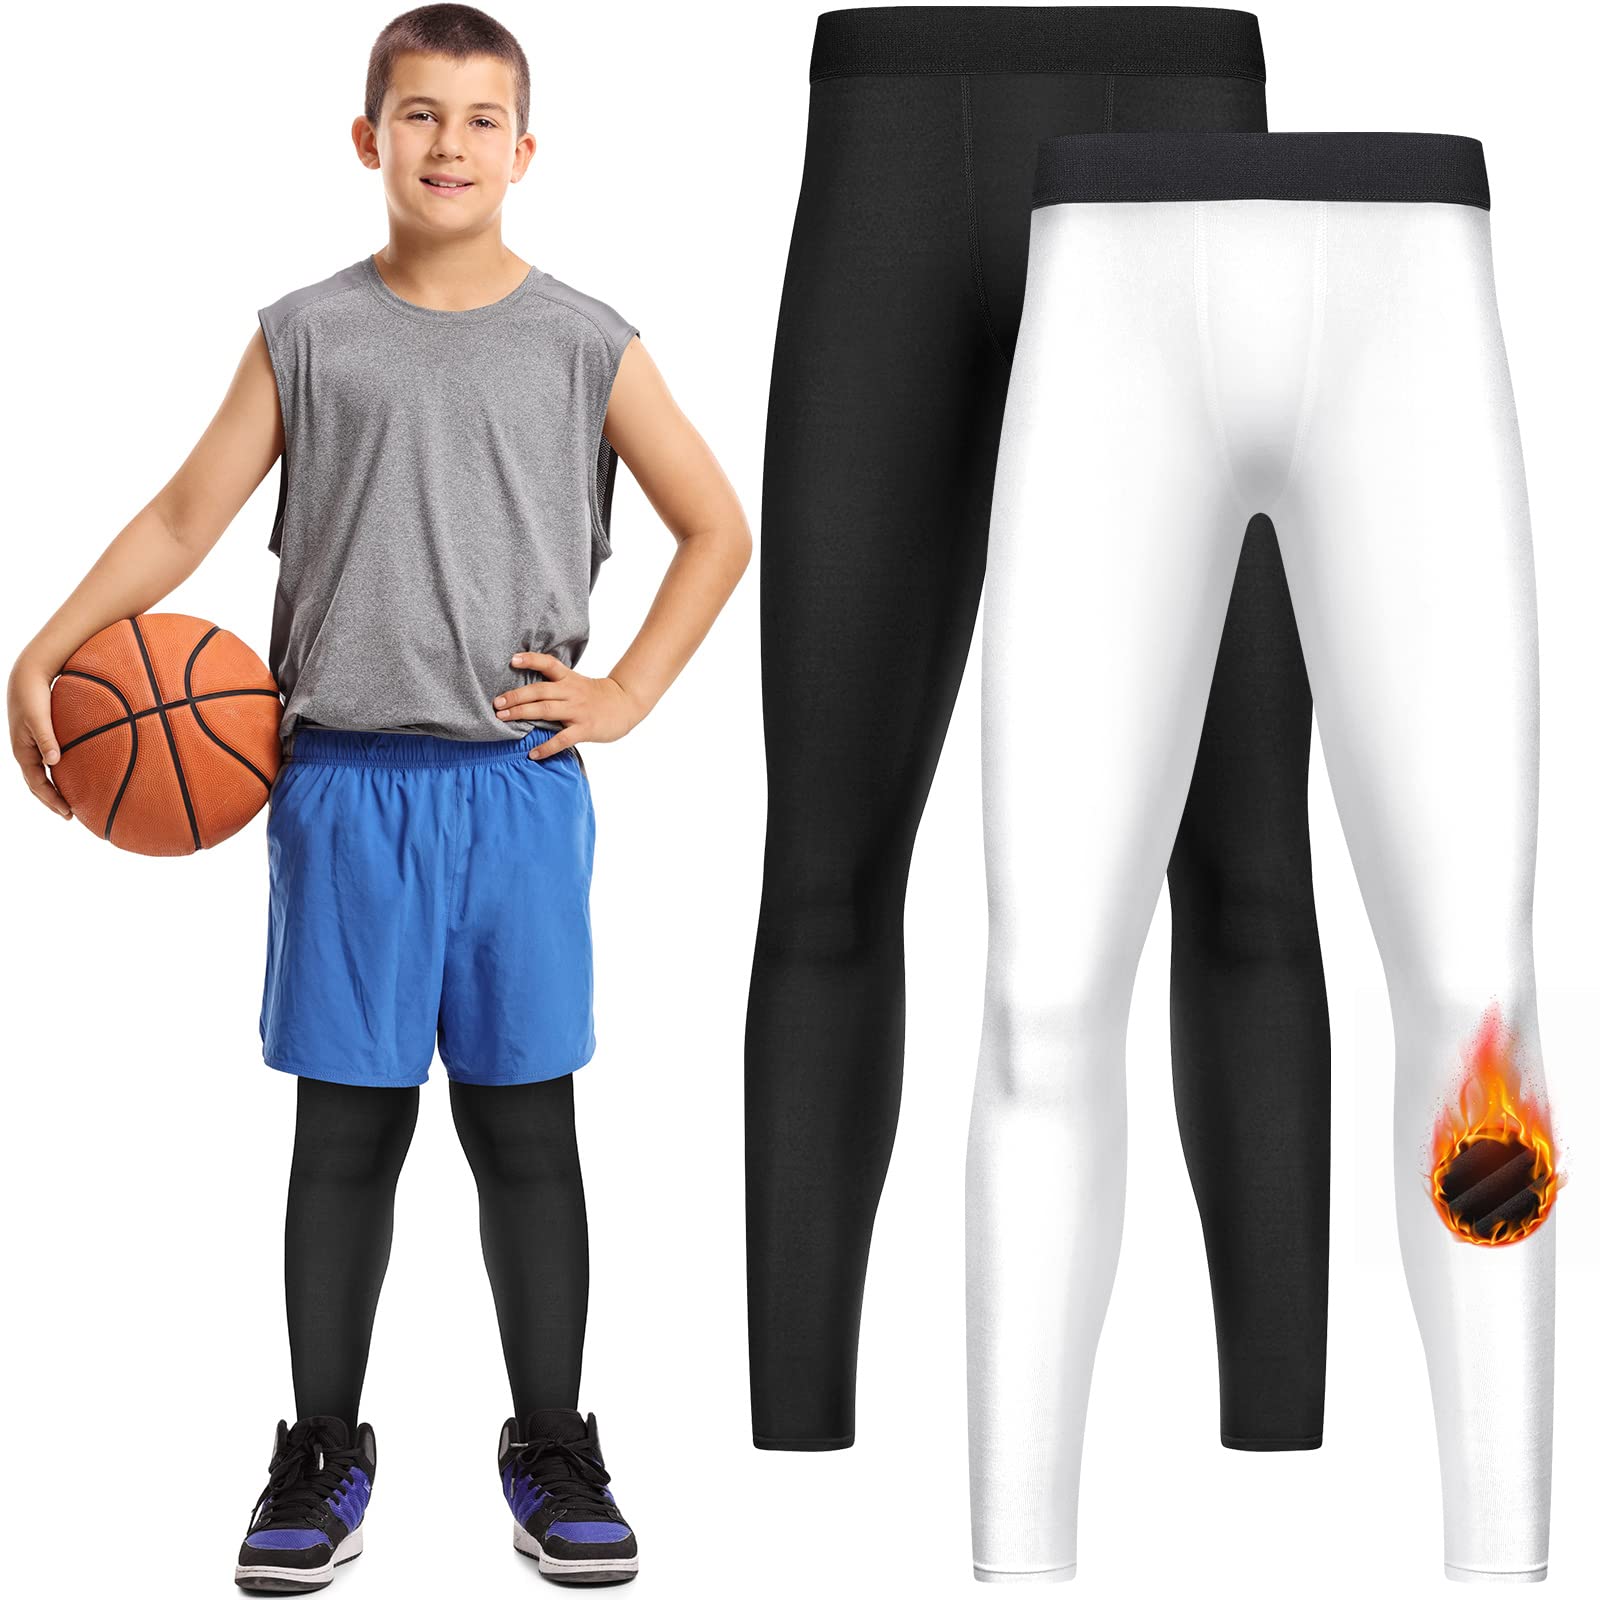 Haysandy Thermal Boys' Compression Winter Warm Leggings 2 Pack Tights  Athletic Pants Basketball Compression Pants Boys Basketball Leggings Black  White